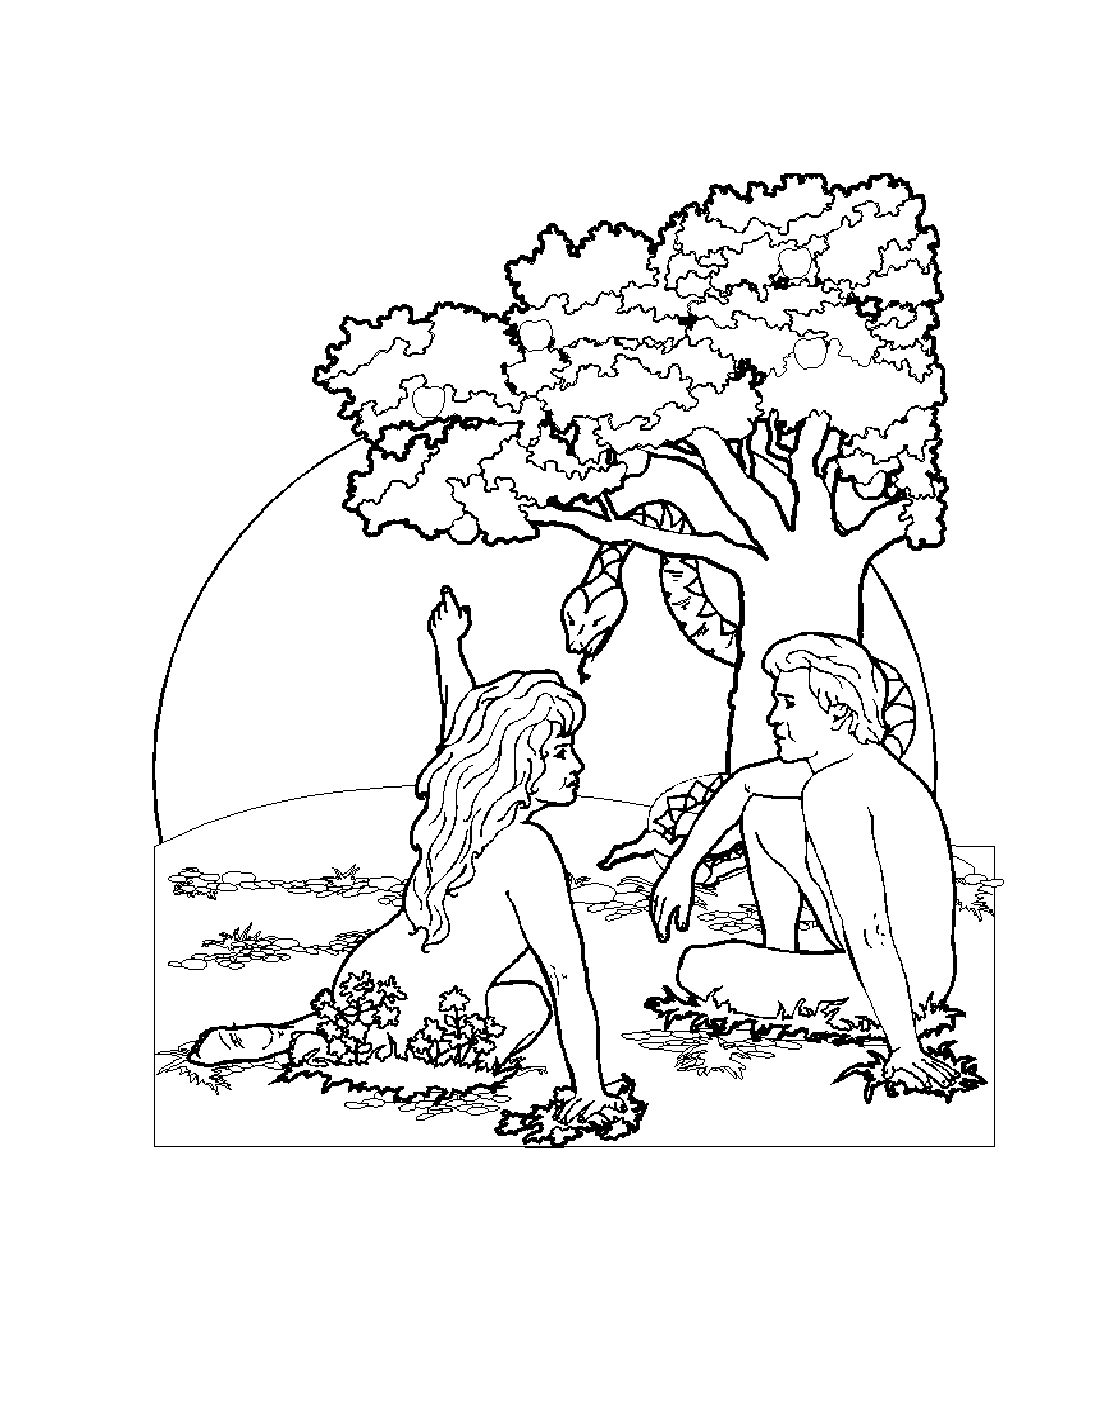 Adam, Eve and the snake under